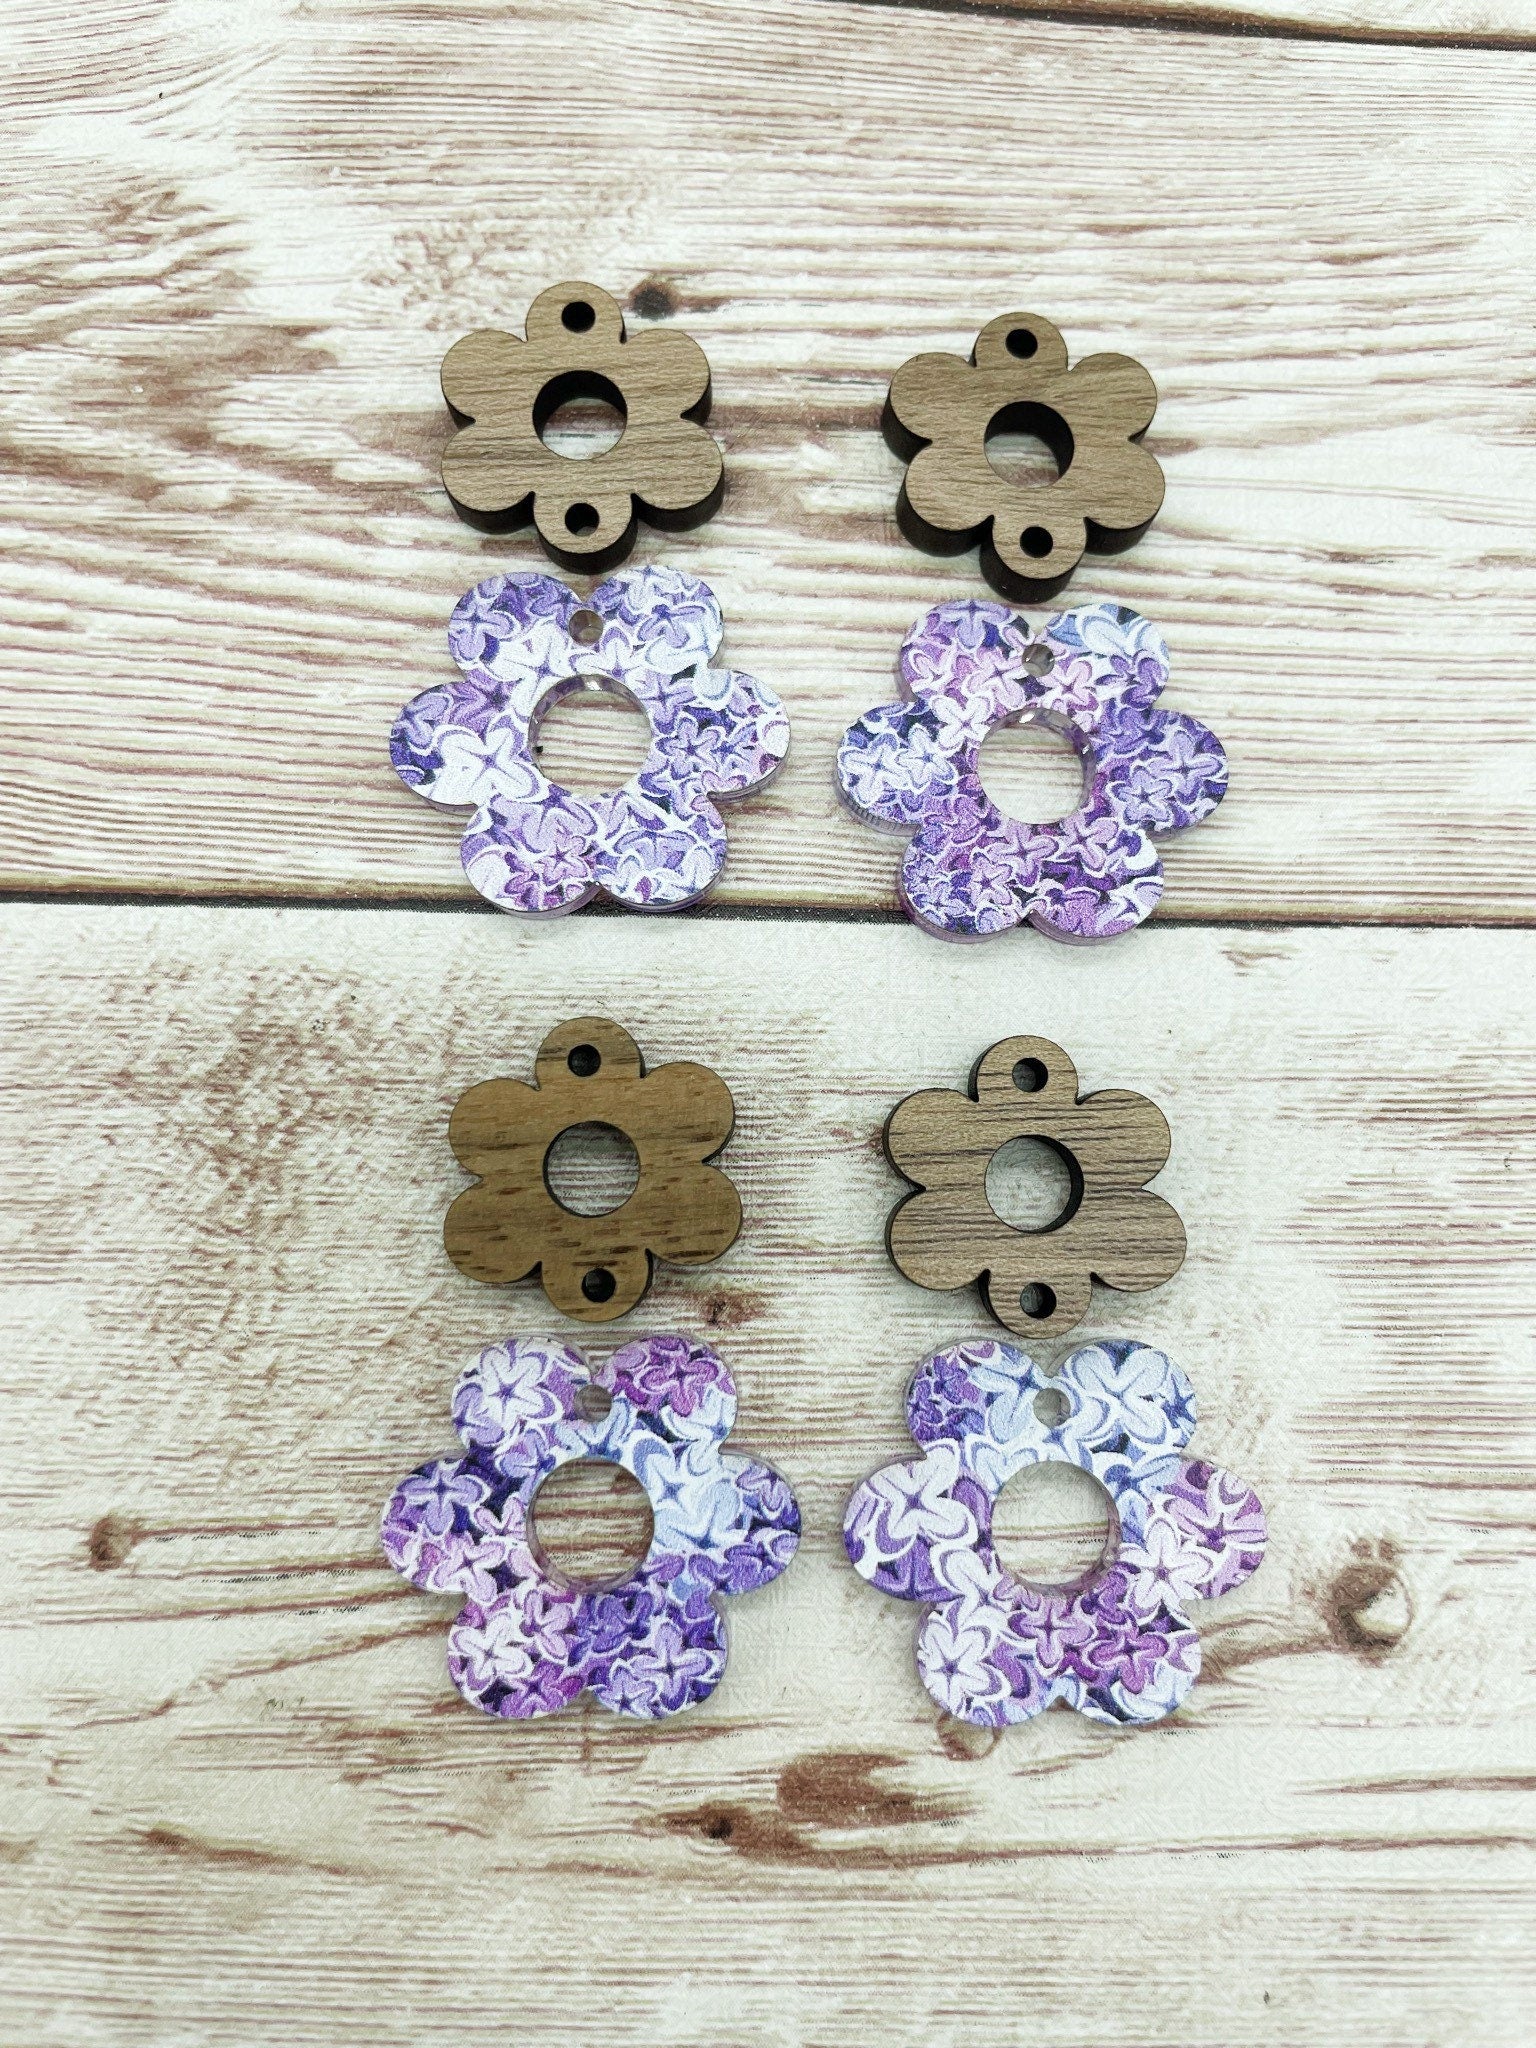 Patterned Lilac Acrylic and Wood Flower Connector Set Earring Blanks, DIY Jewelry Making